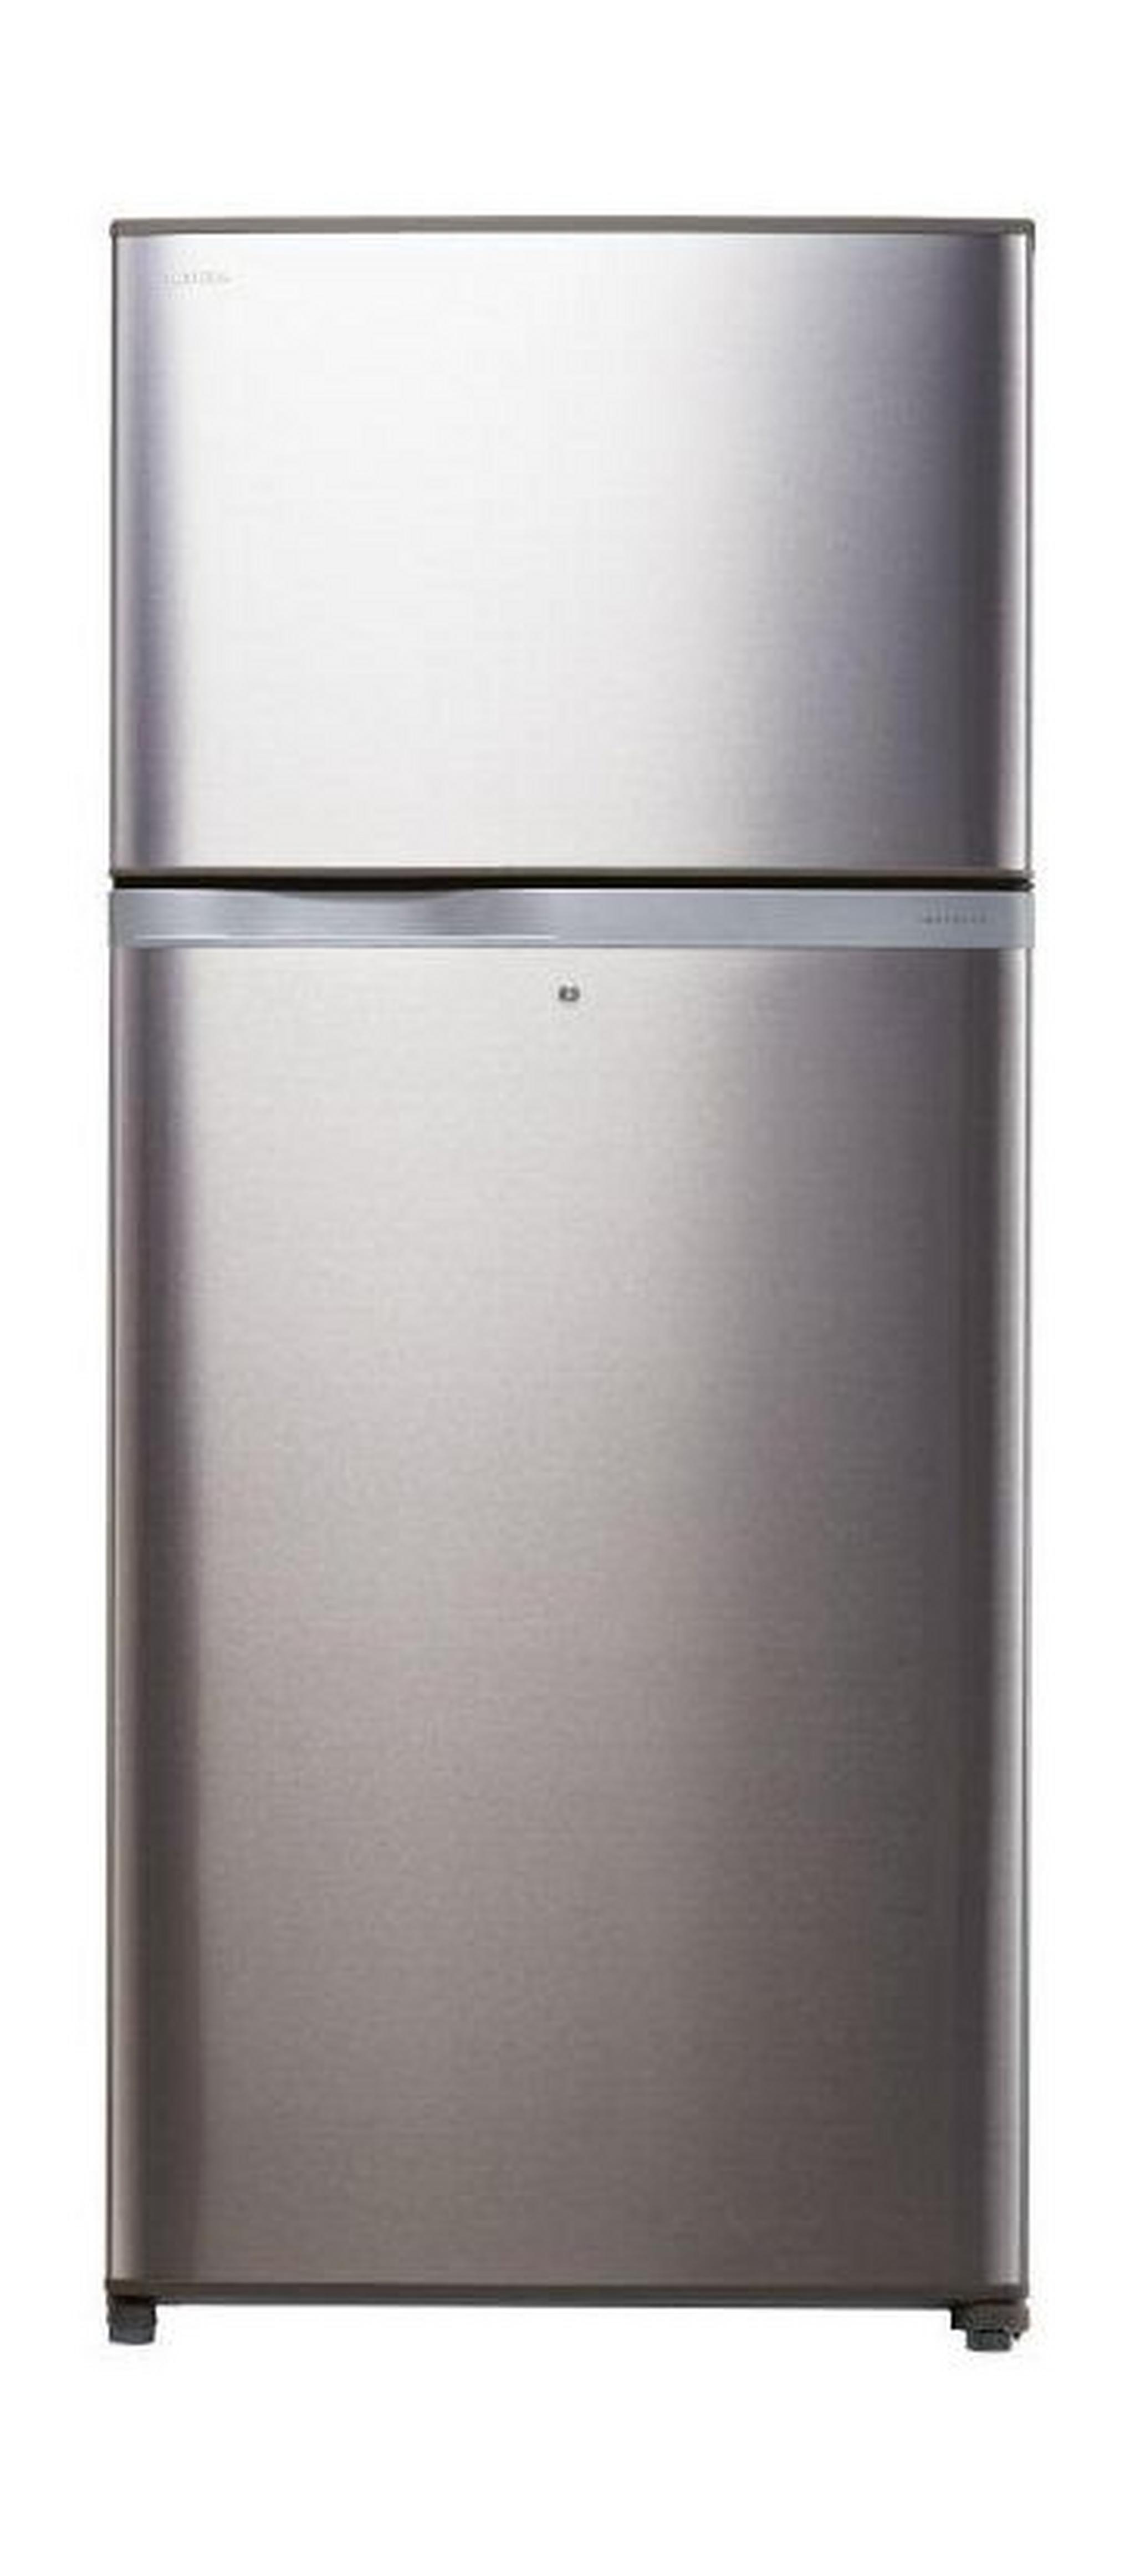 Toshiba Inverter 25 Cft. Top Mount Refrigerator + Stand For Refrigerator With Large Wheels